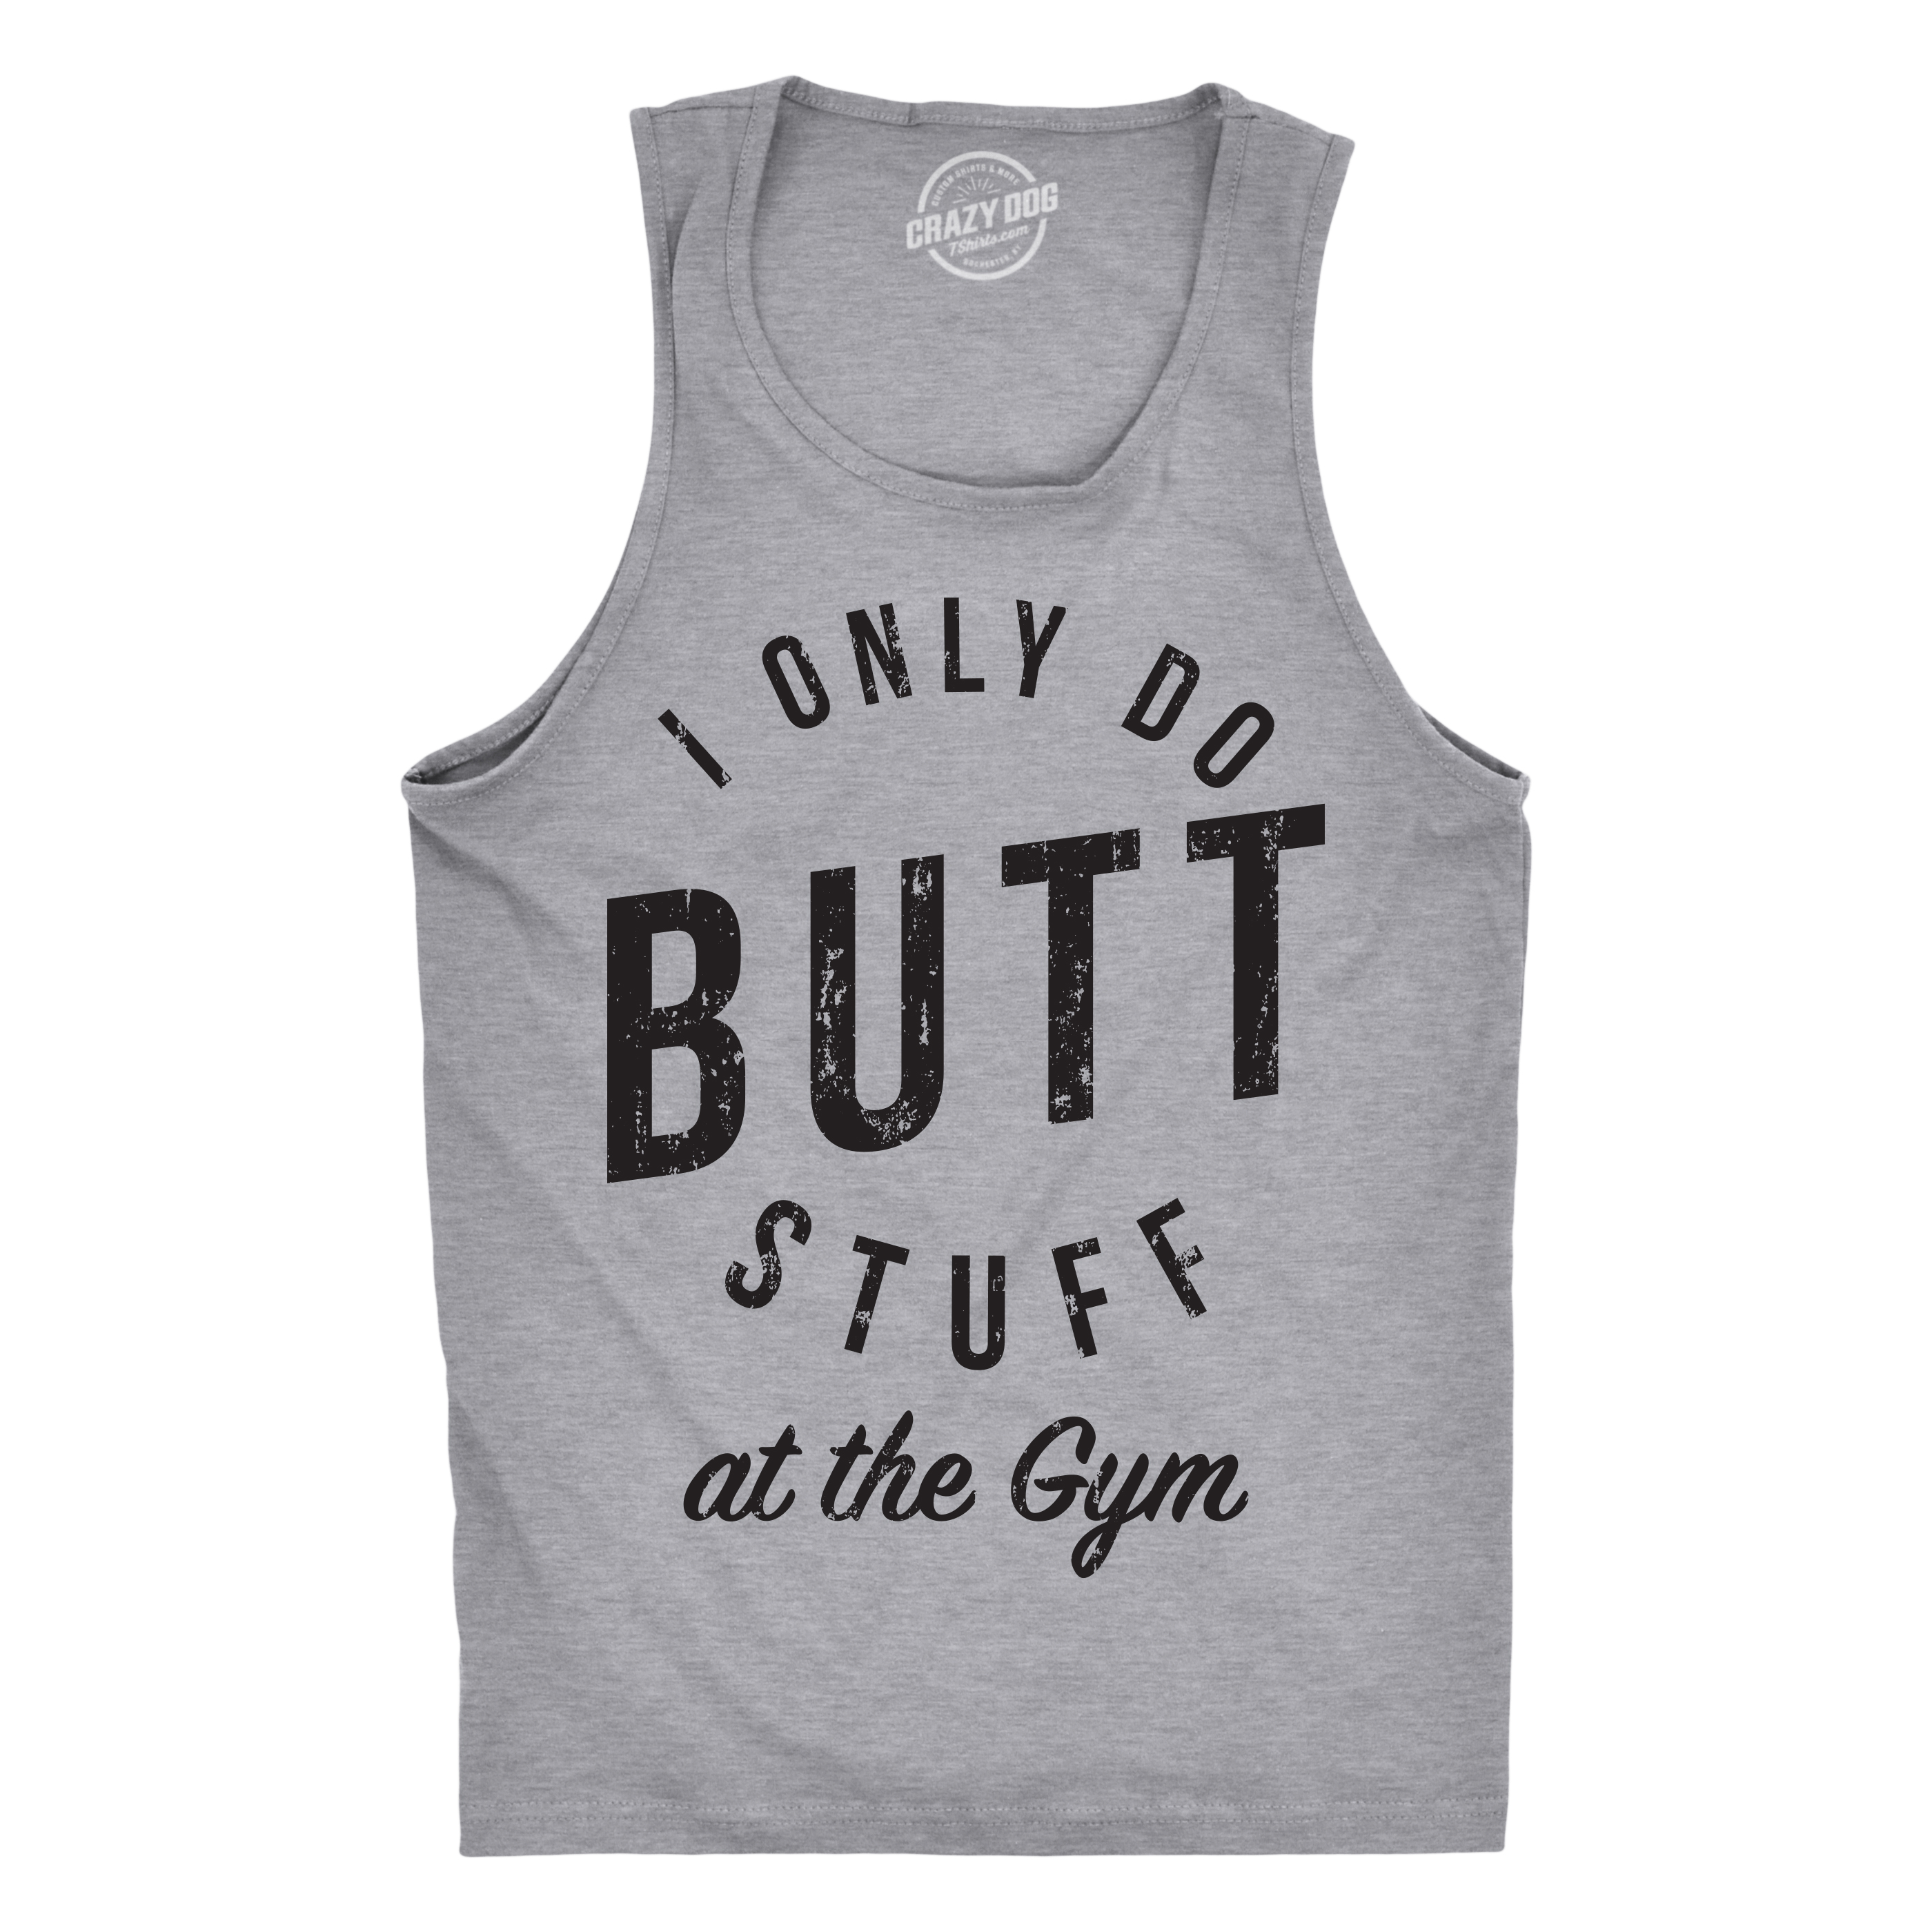 Mens Fitness Tank I Only Do Butt Stuff At The Gym Funny Sarcastic Fitness Workout TankTop - image 1 of 7